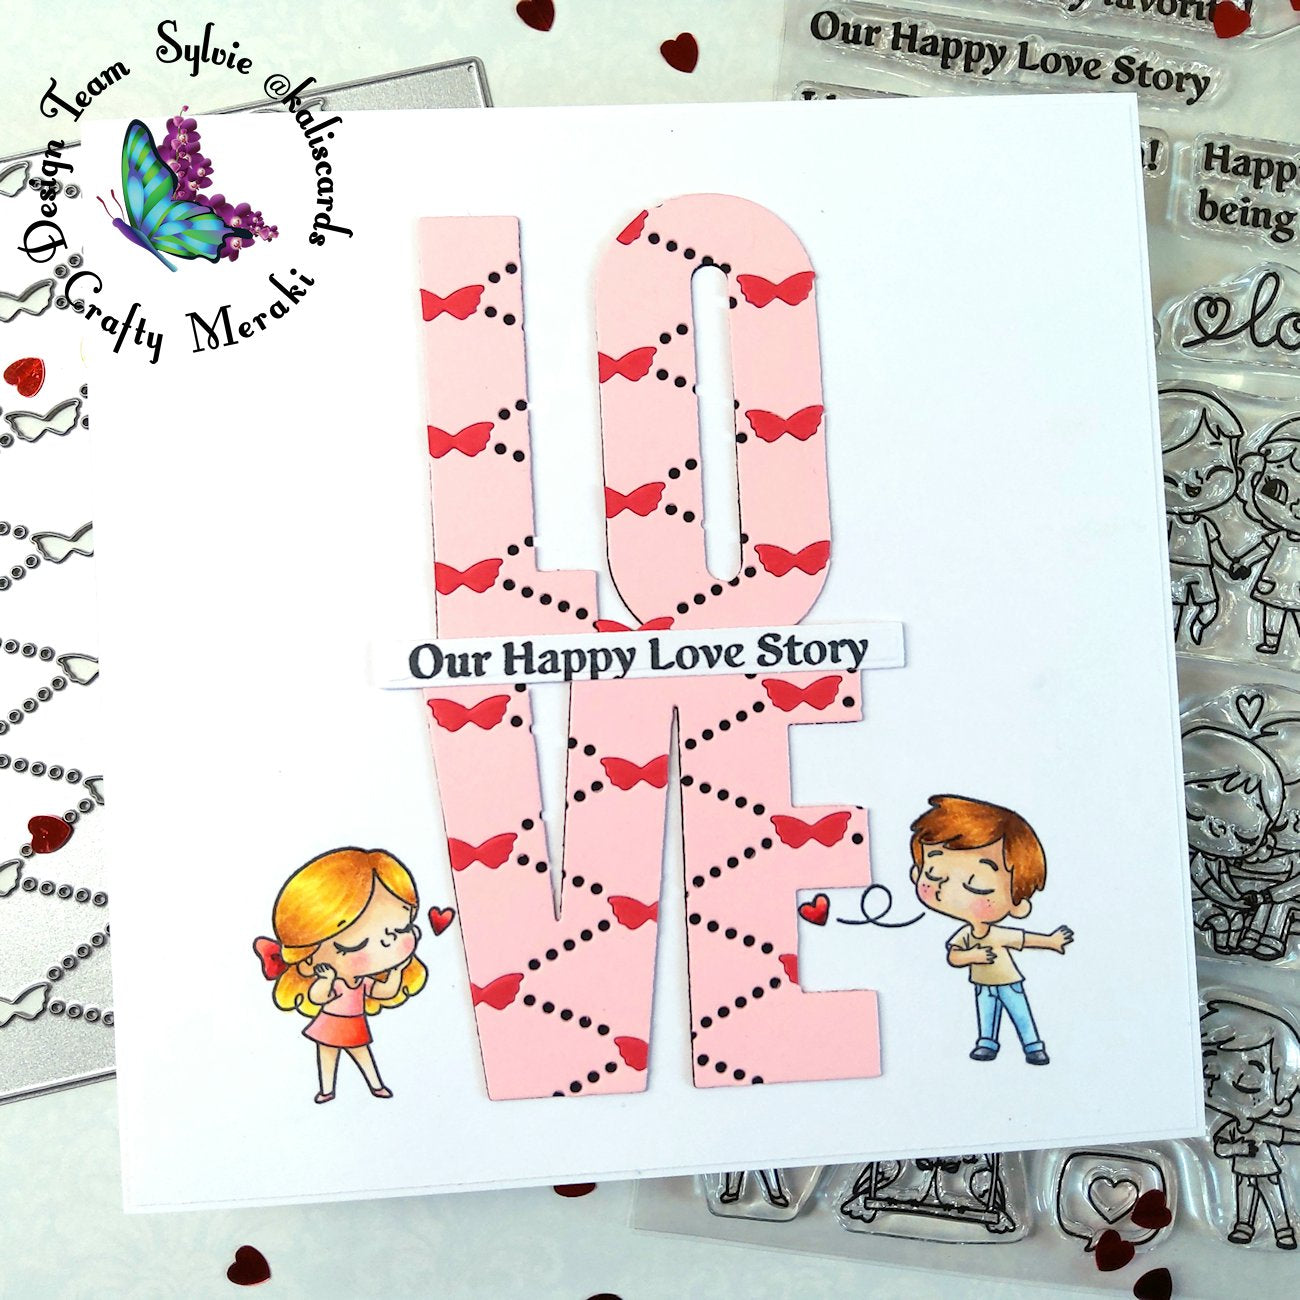 Our happy love story by Sylvie @kaliscards